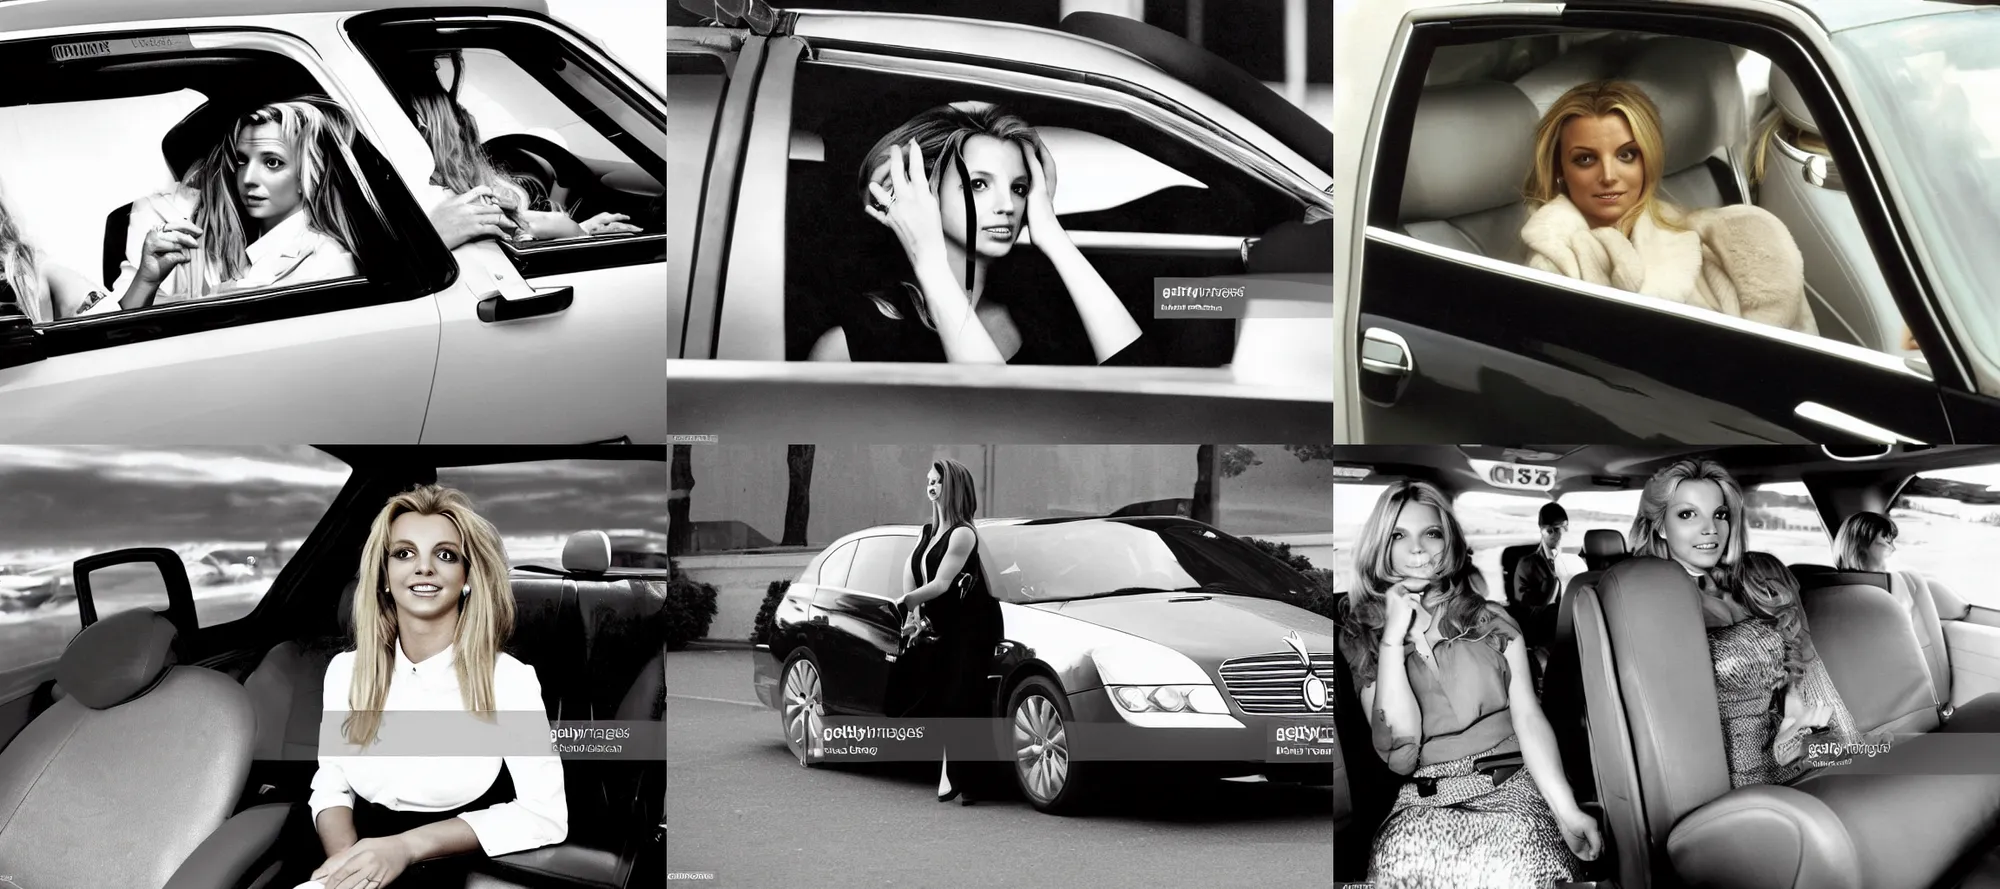 Prompt: a woman sitting in the back seat of a car polished movie still associated press photo chauffeur britney stewardess by Dahlov Ipcar dribble 2005 an album cover model